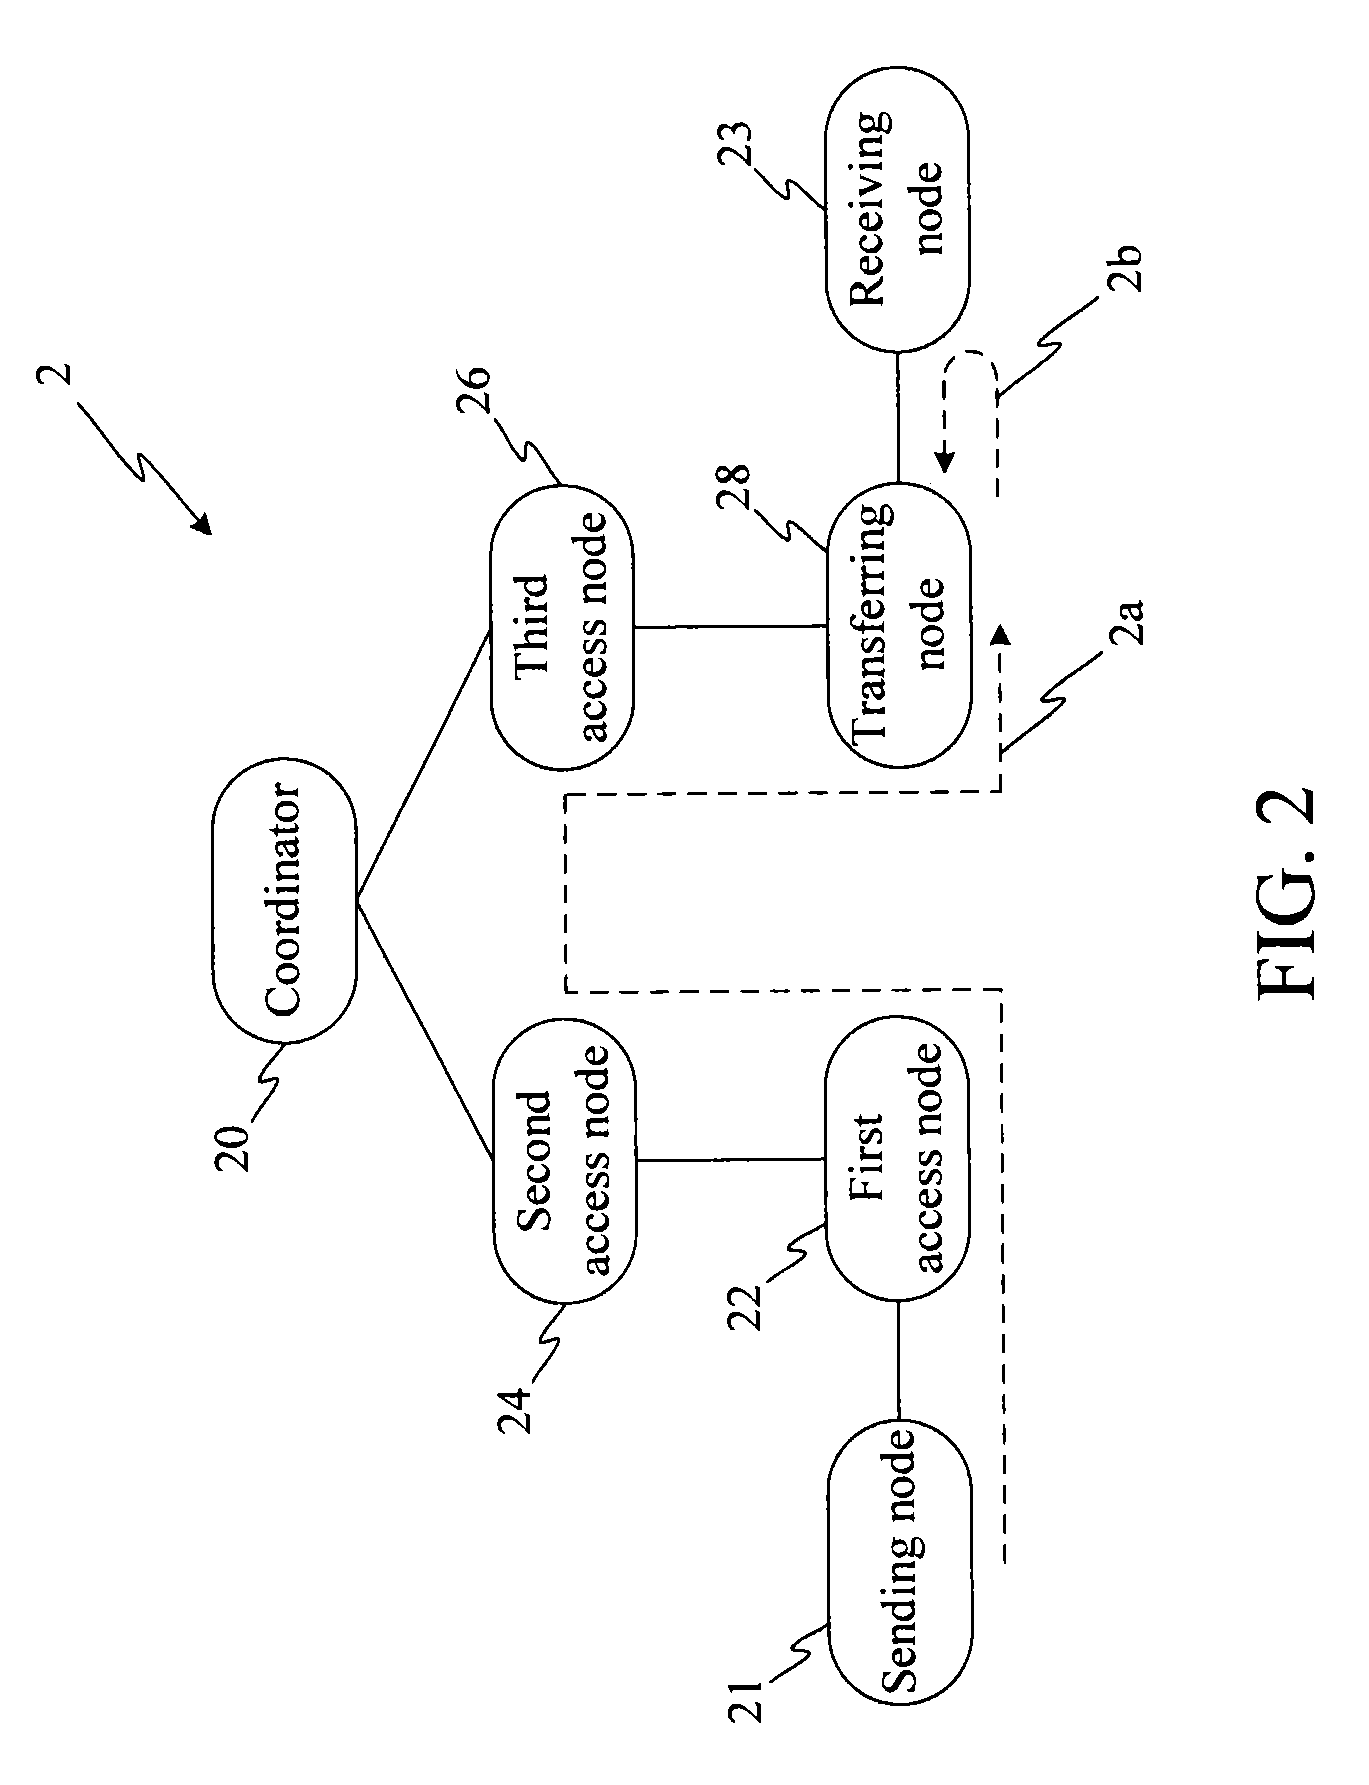 Power-saving wireless network, packet transmitting method for use in the wireless network and computer readable media